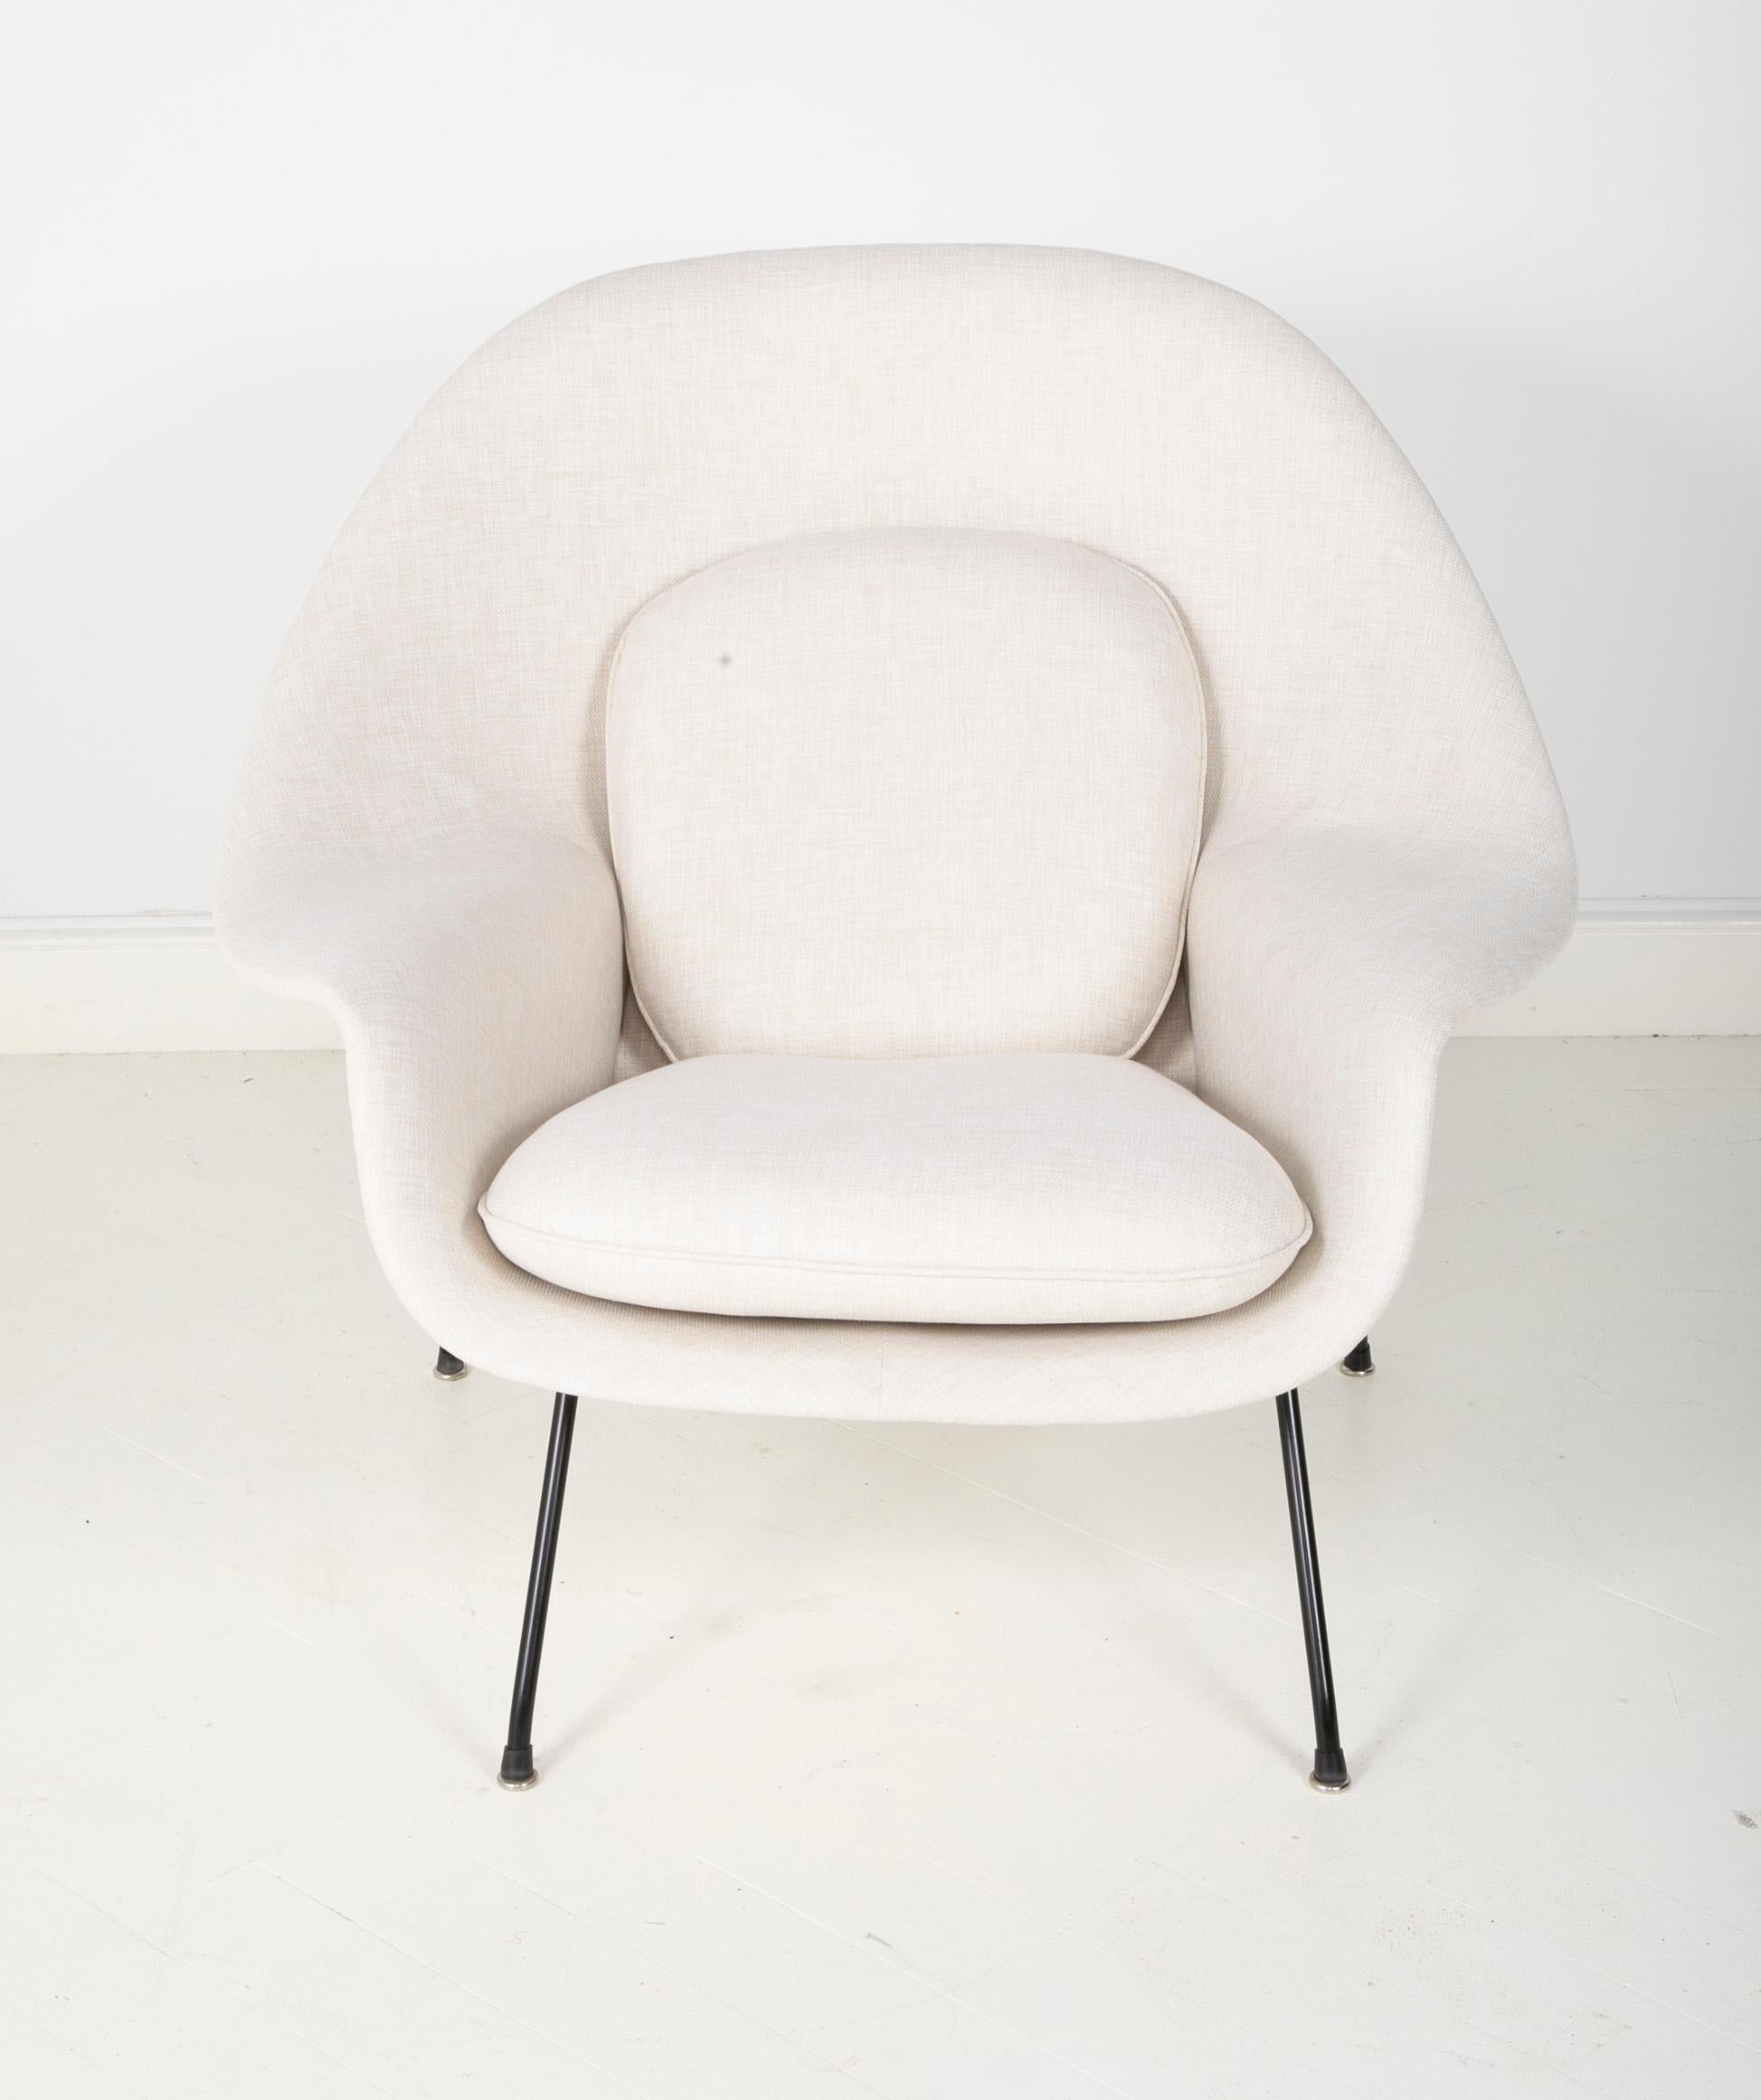 A early production womb chair designed by Eero Saarinen. Produced by Knoll starting in 1946 this model was produced in 1952. It retains its original label. Newly reupholstered.